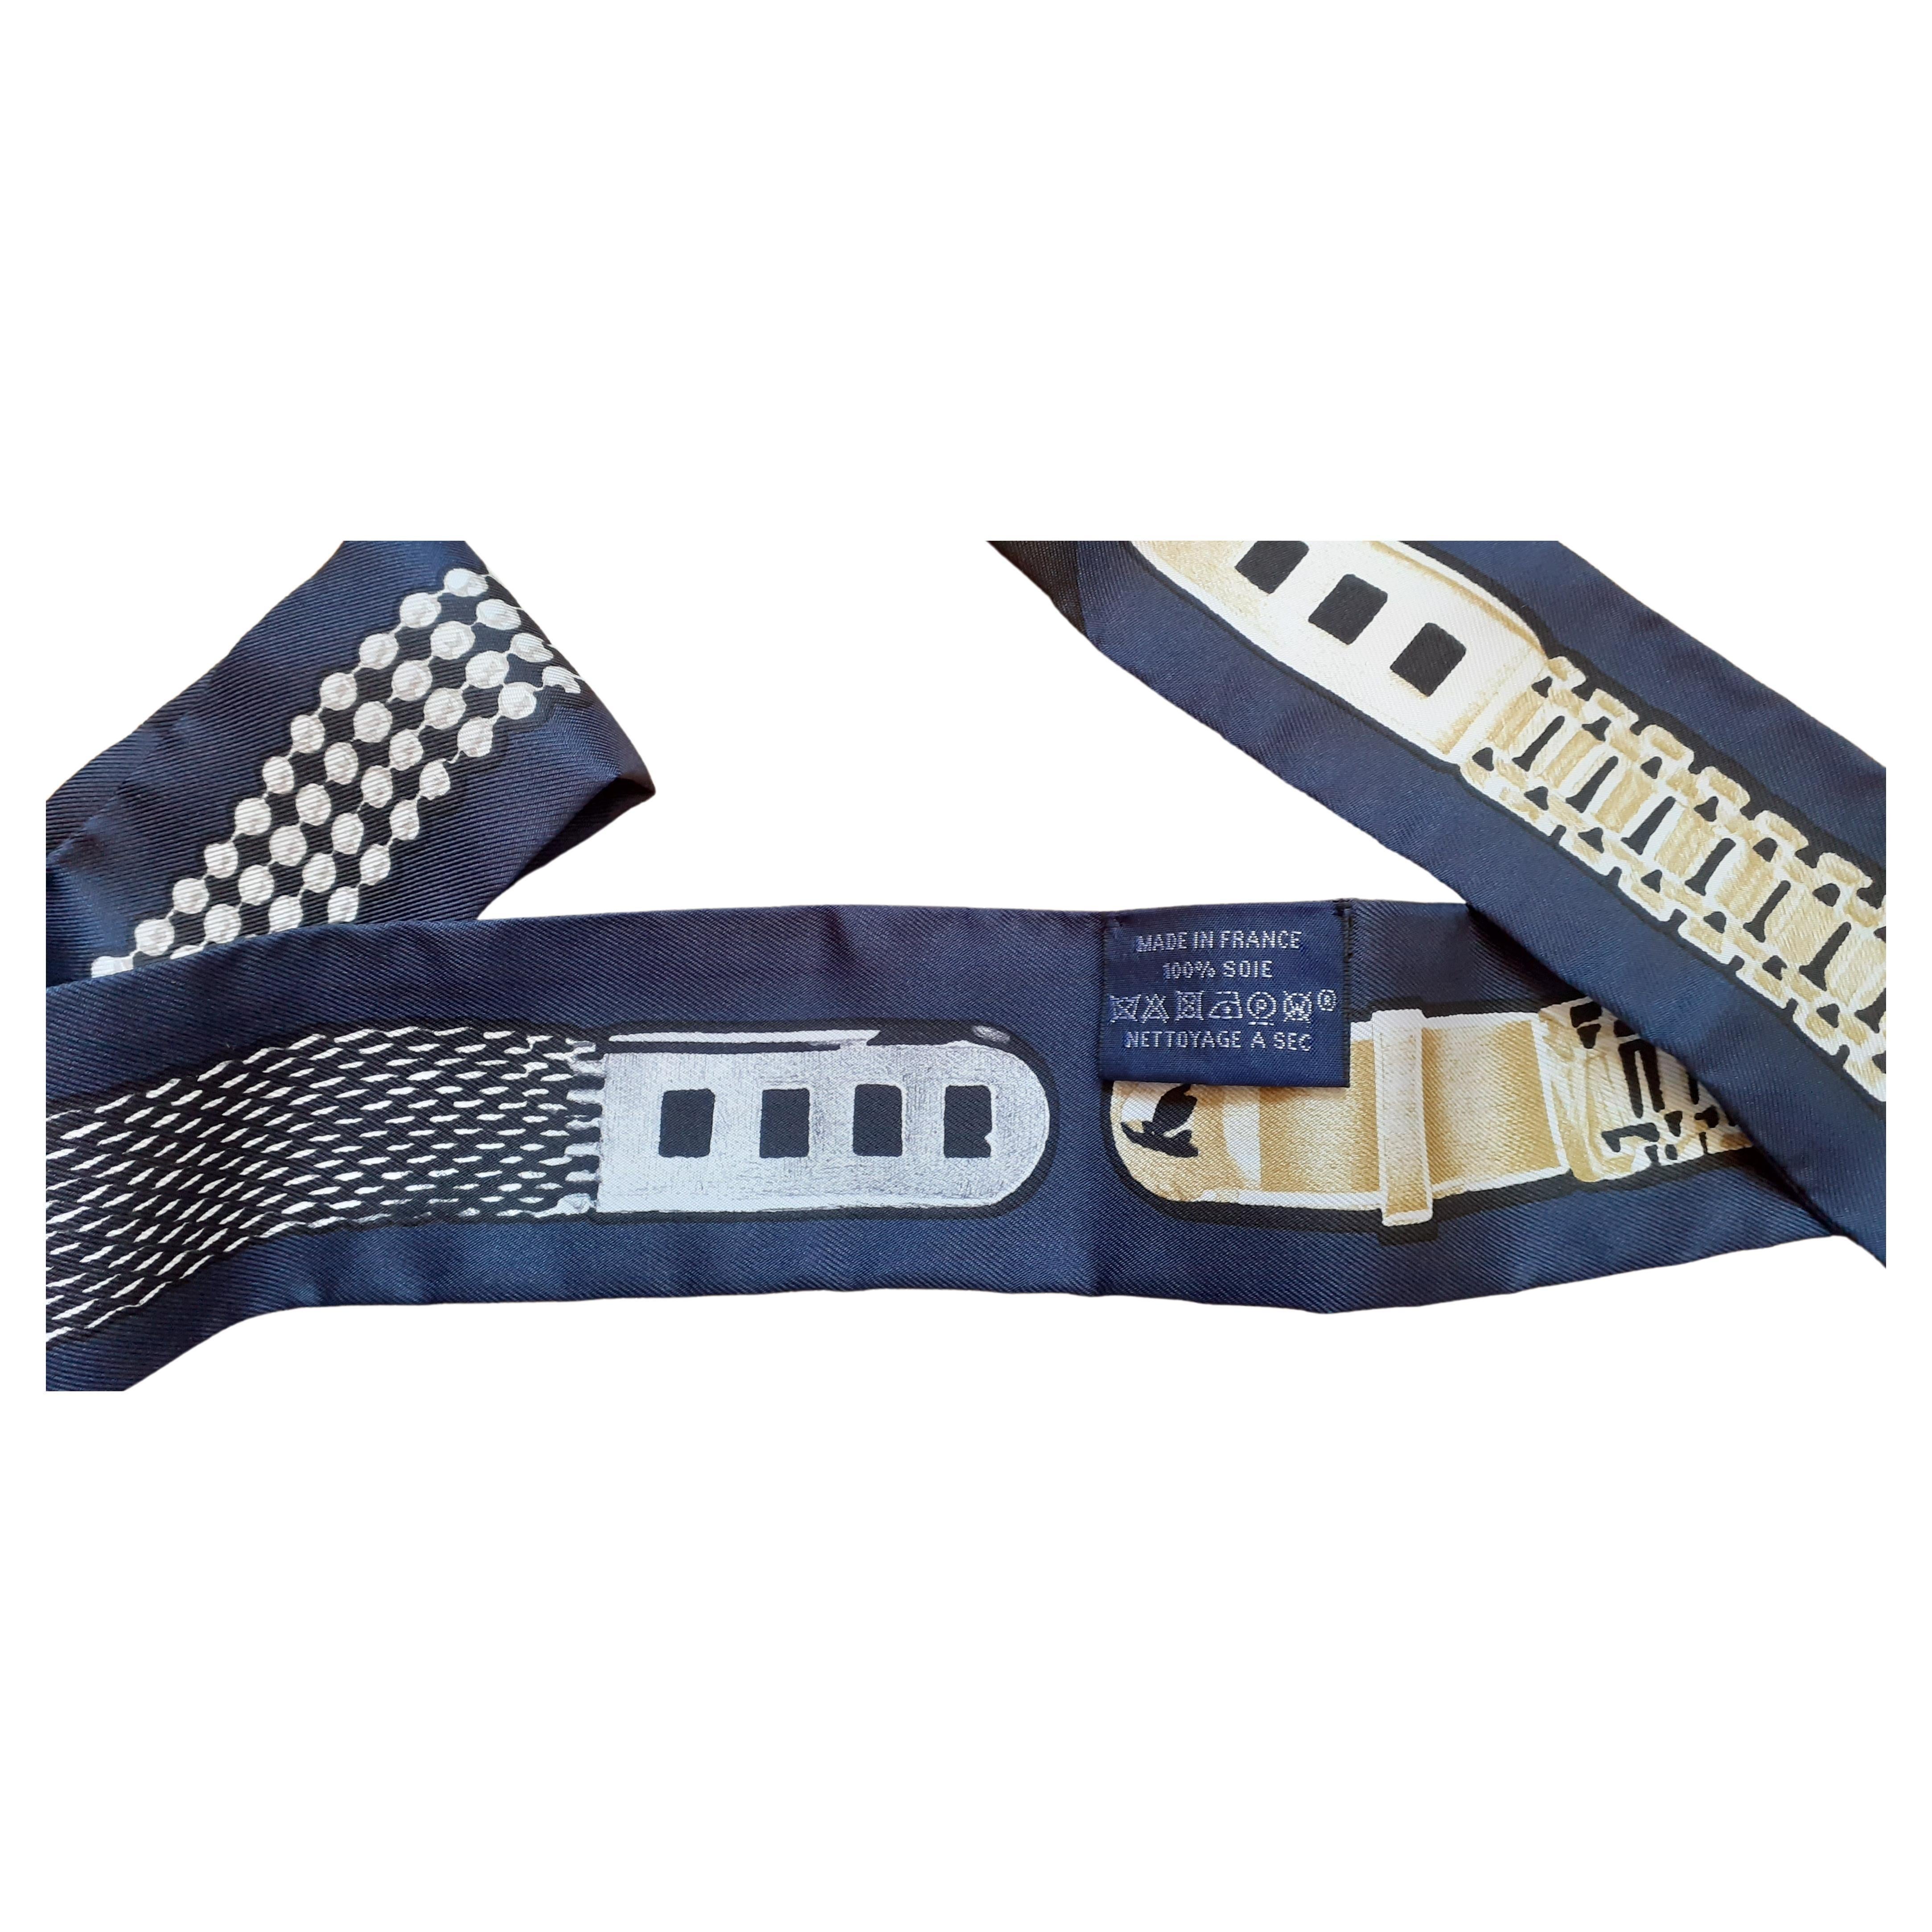 Beautiful Authentic Hermès Scarf

« Twilly » Version

Print: “Le trésor de Médor”

Pattern: Silver and Gold Bracelets

Designed by Florence Manlik in 2020

Made in France

Made of 100% Silk

Colorways: Marine / Gris / Noir (Navy Blue / Grey /